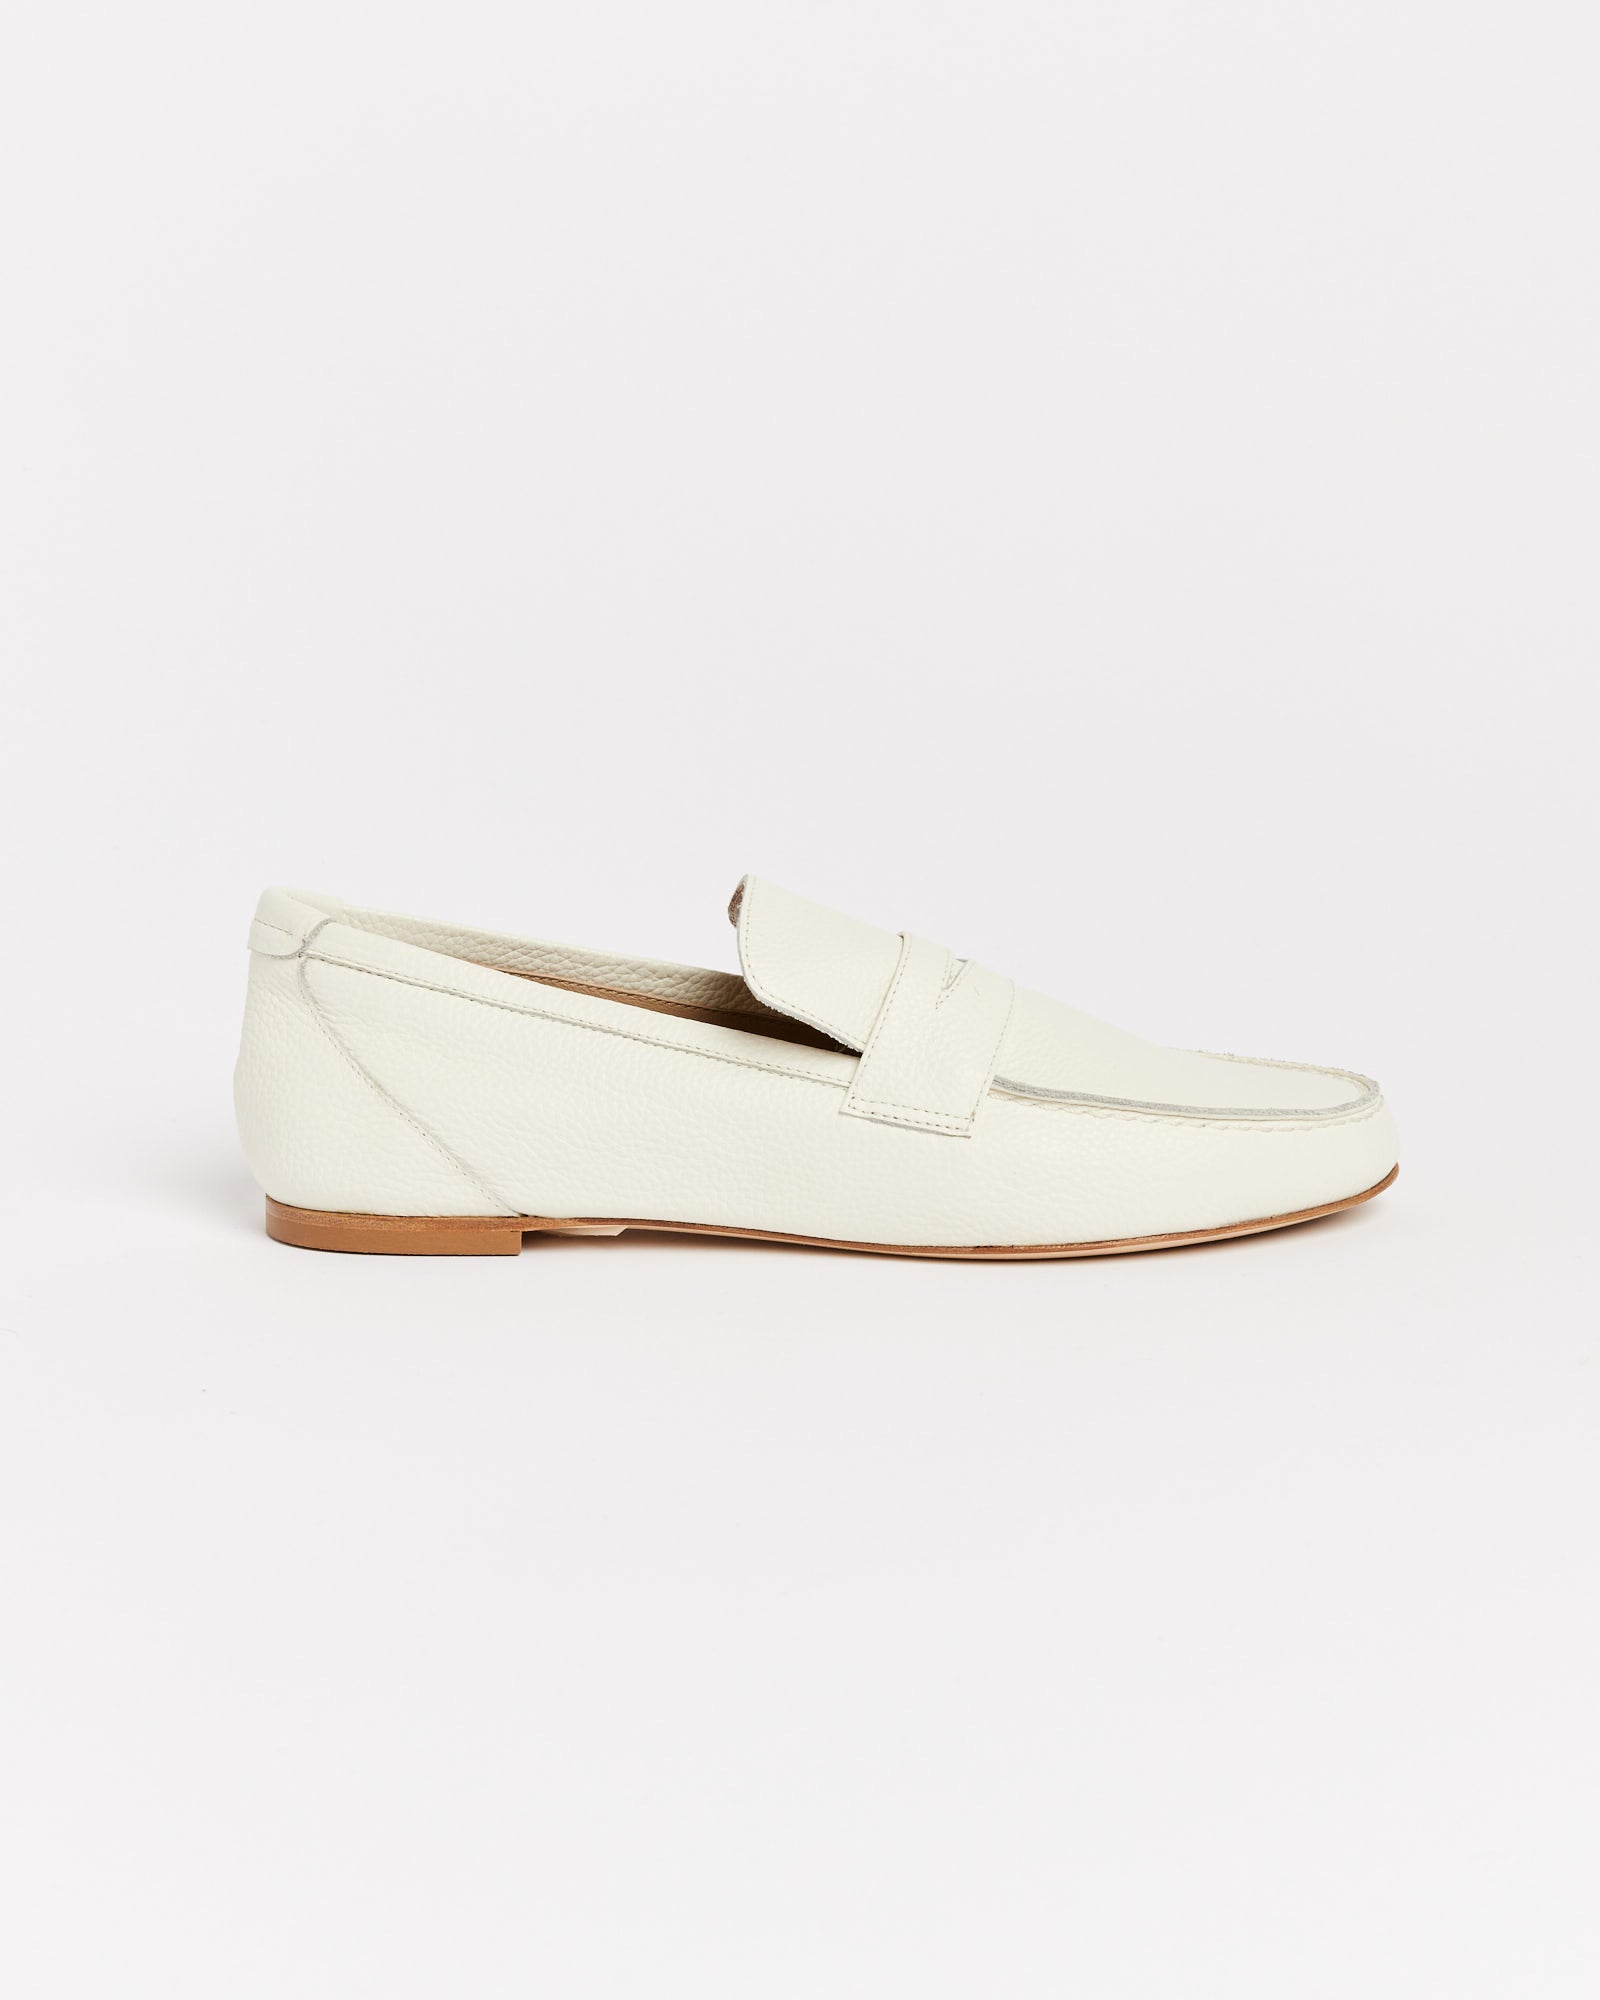 Penny Loafers in Pebble White